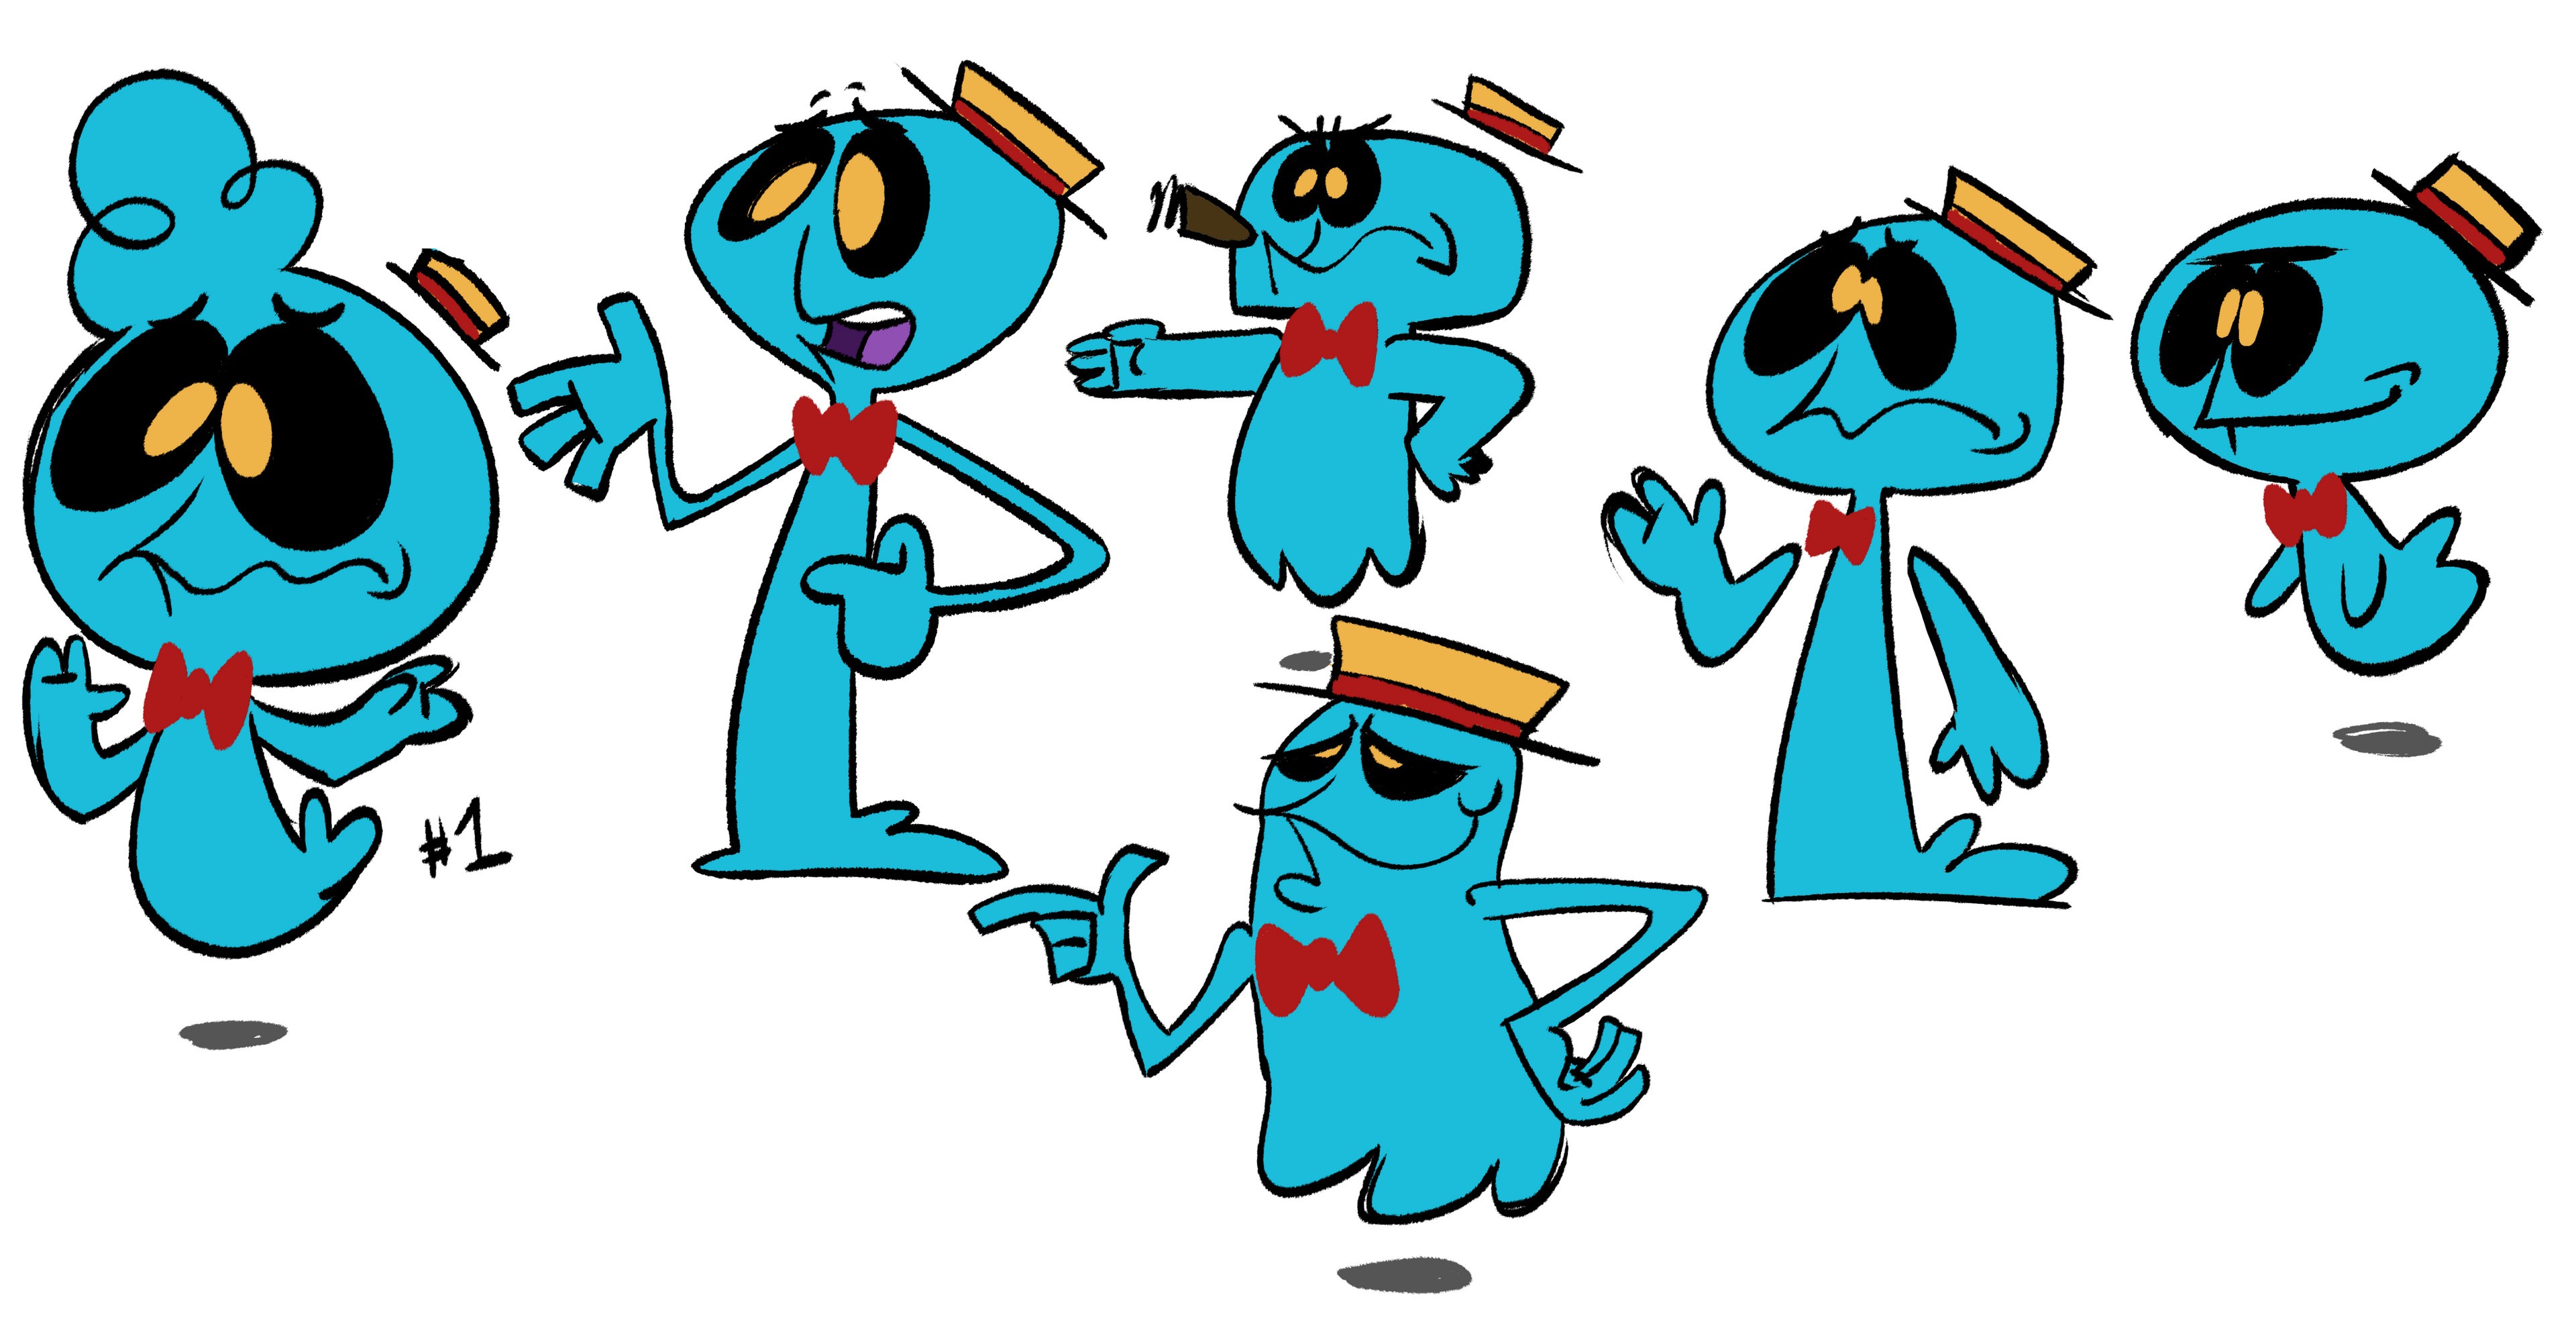 Refined Boo Berry Sketches with Color